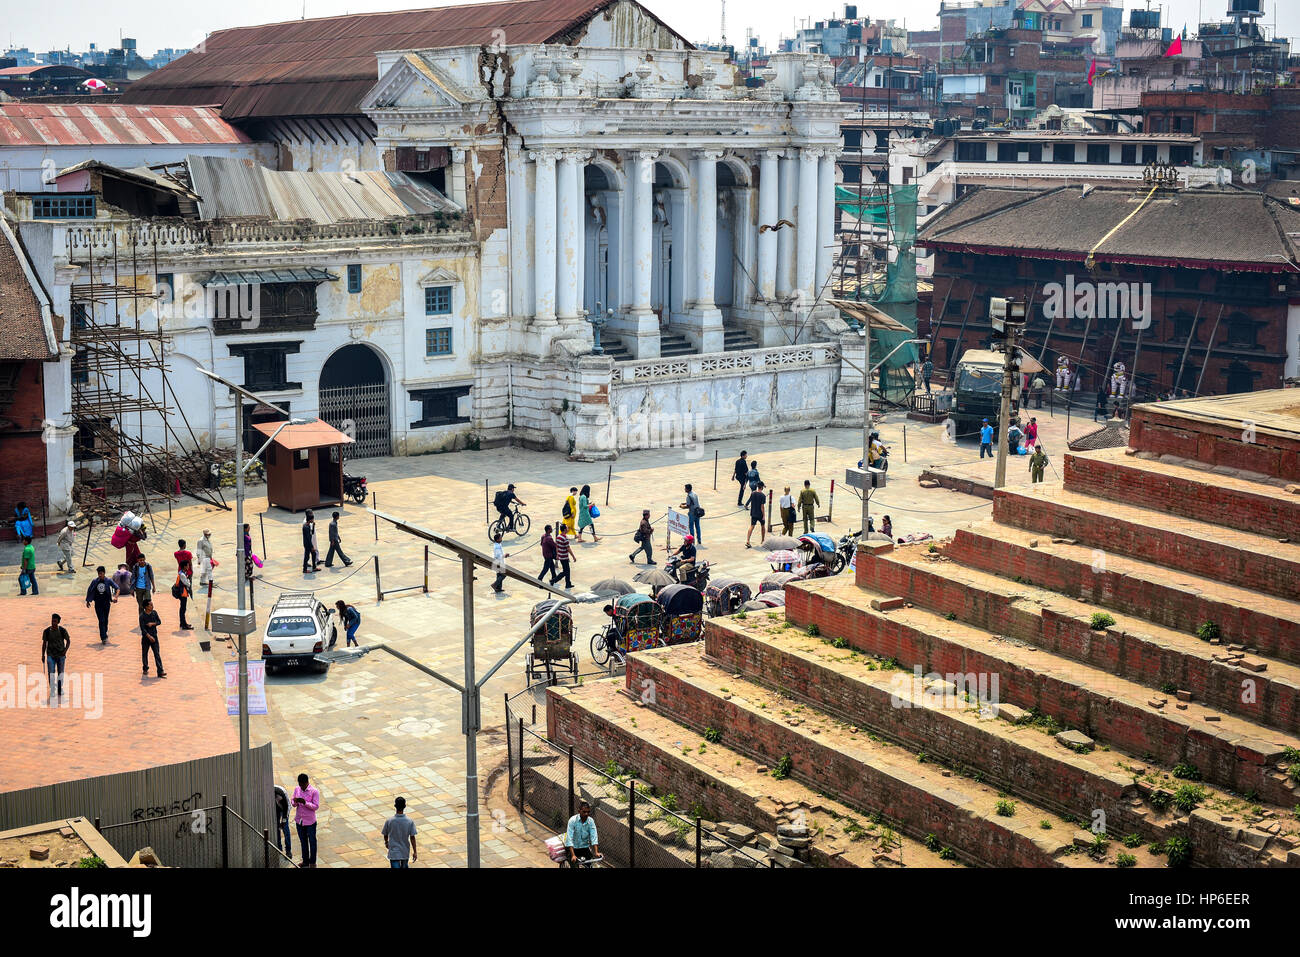 Crowd walking on the plaza in front of the white building with European architectural style called Gaddi Baithak. Kathmandu, Nepal. Stock Photo